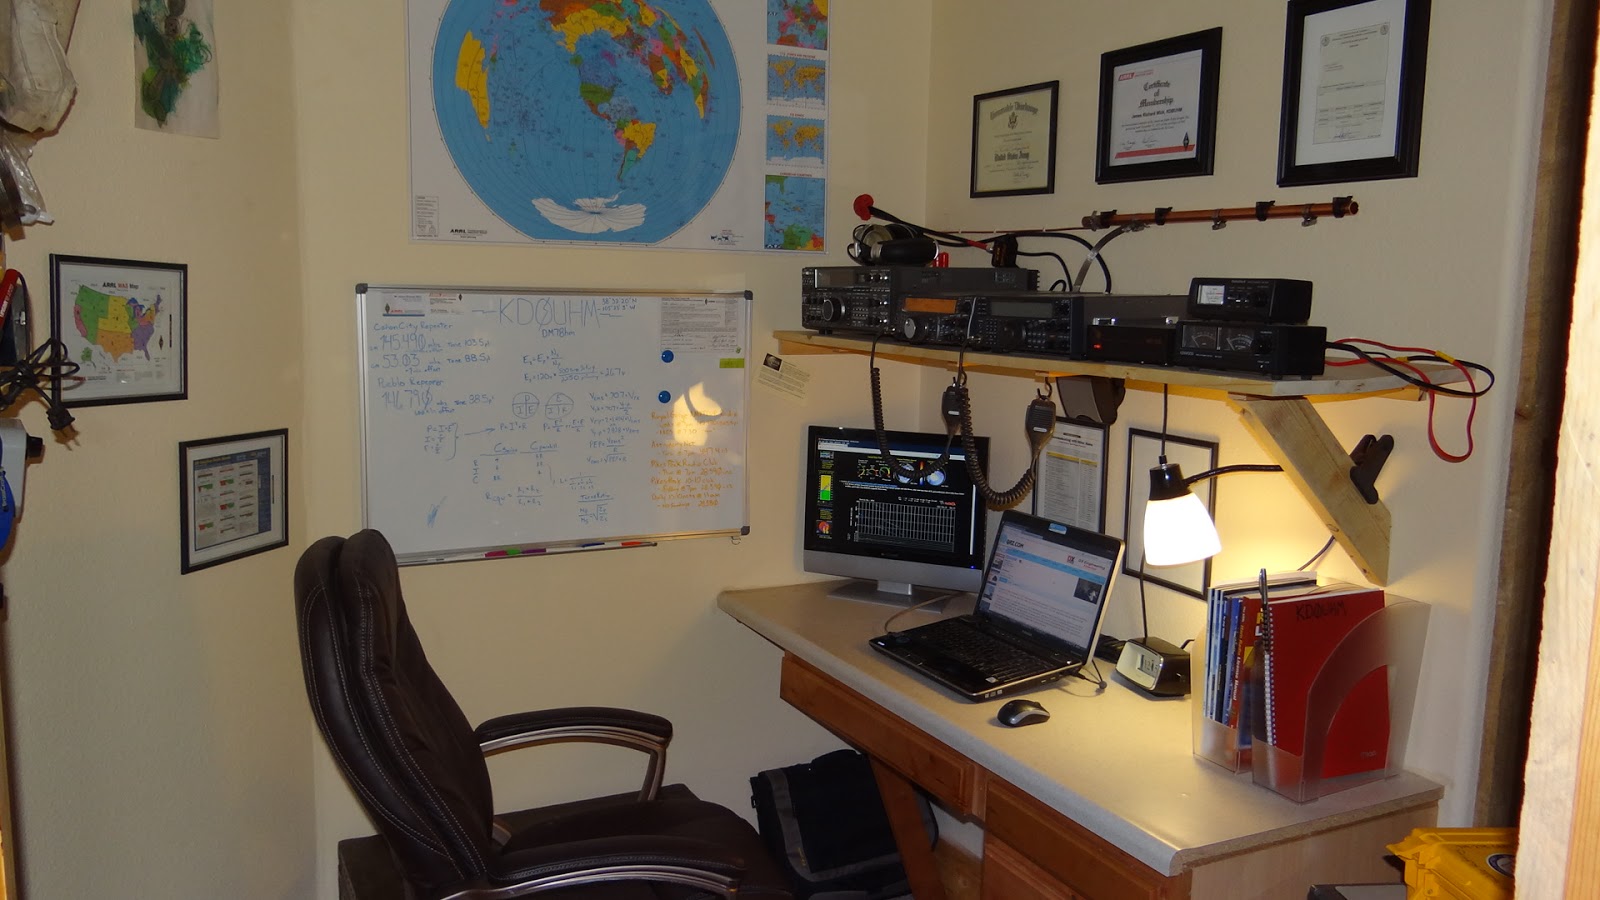 Another large desk is packed with lots of ham radio gear.